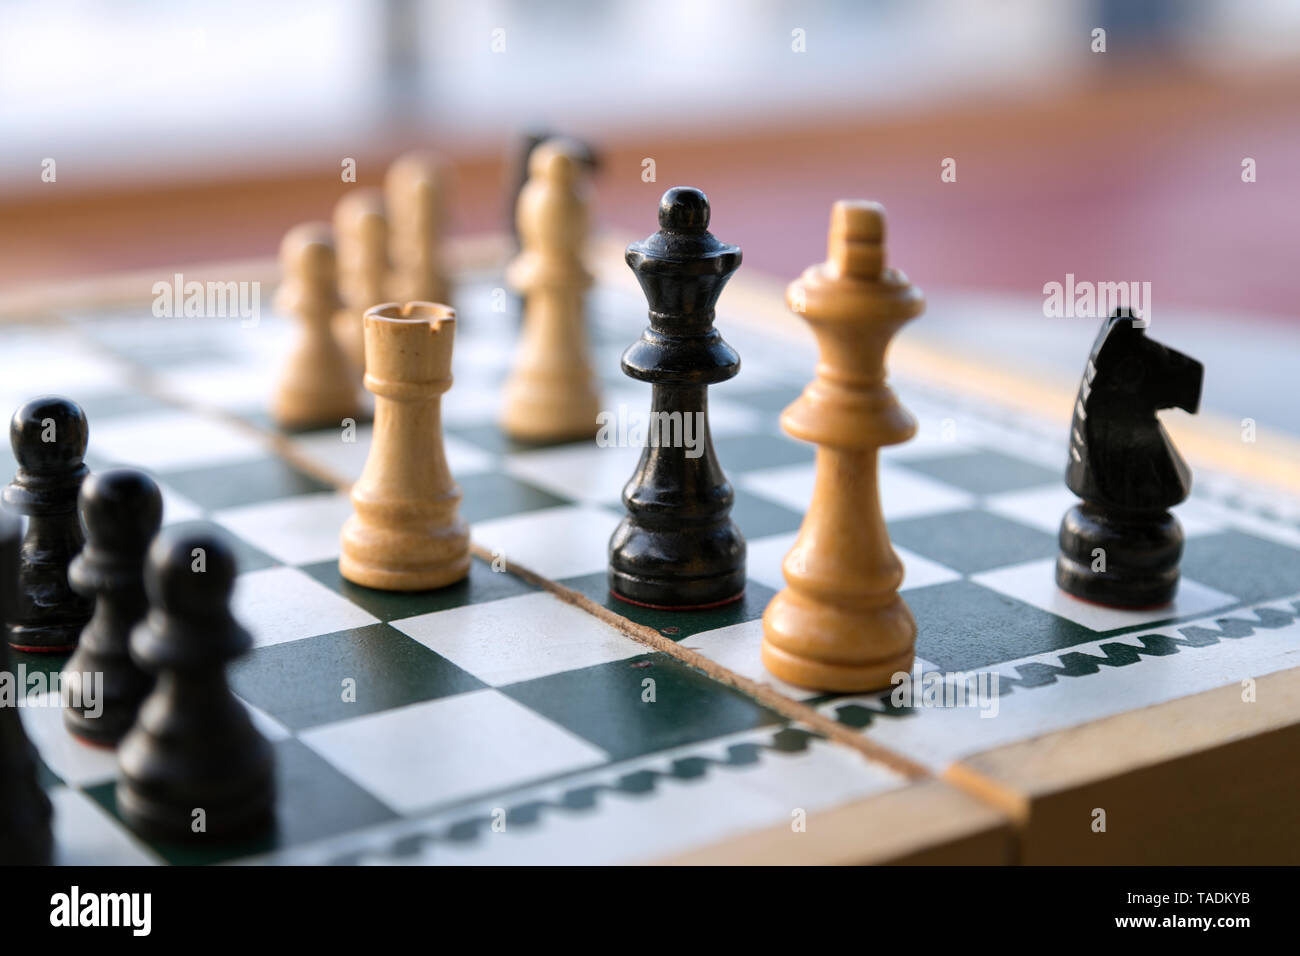 Wooden chess pieces on chessboard Stock Photo